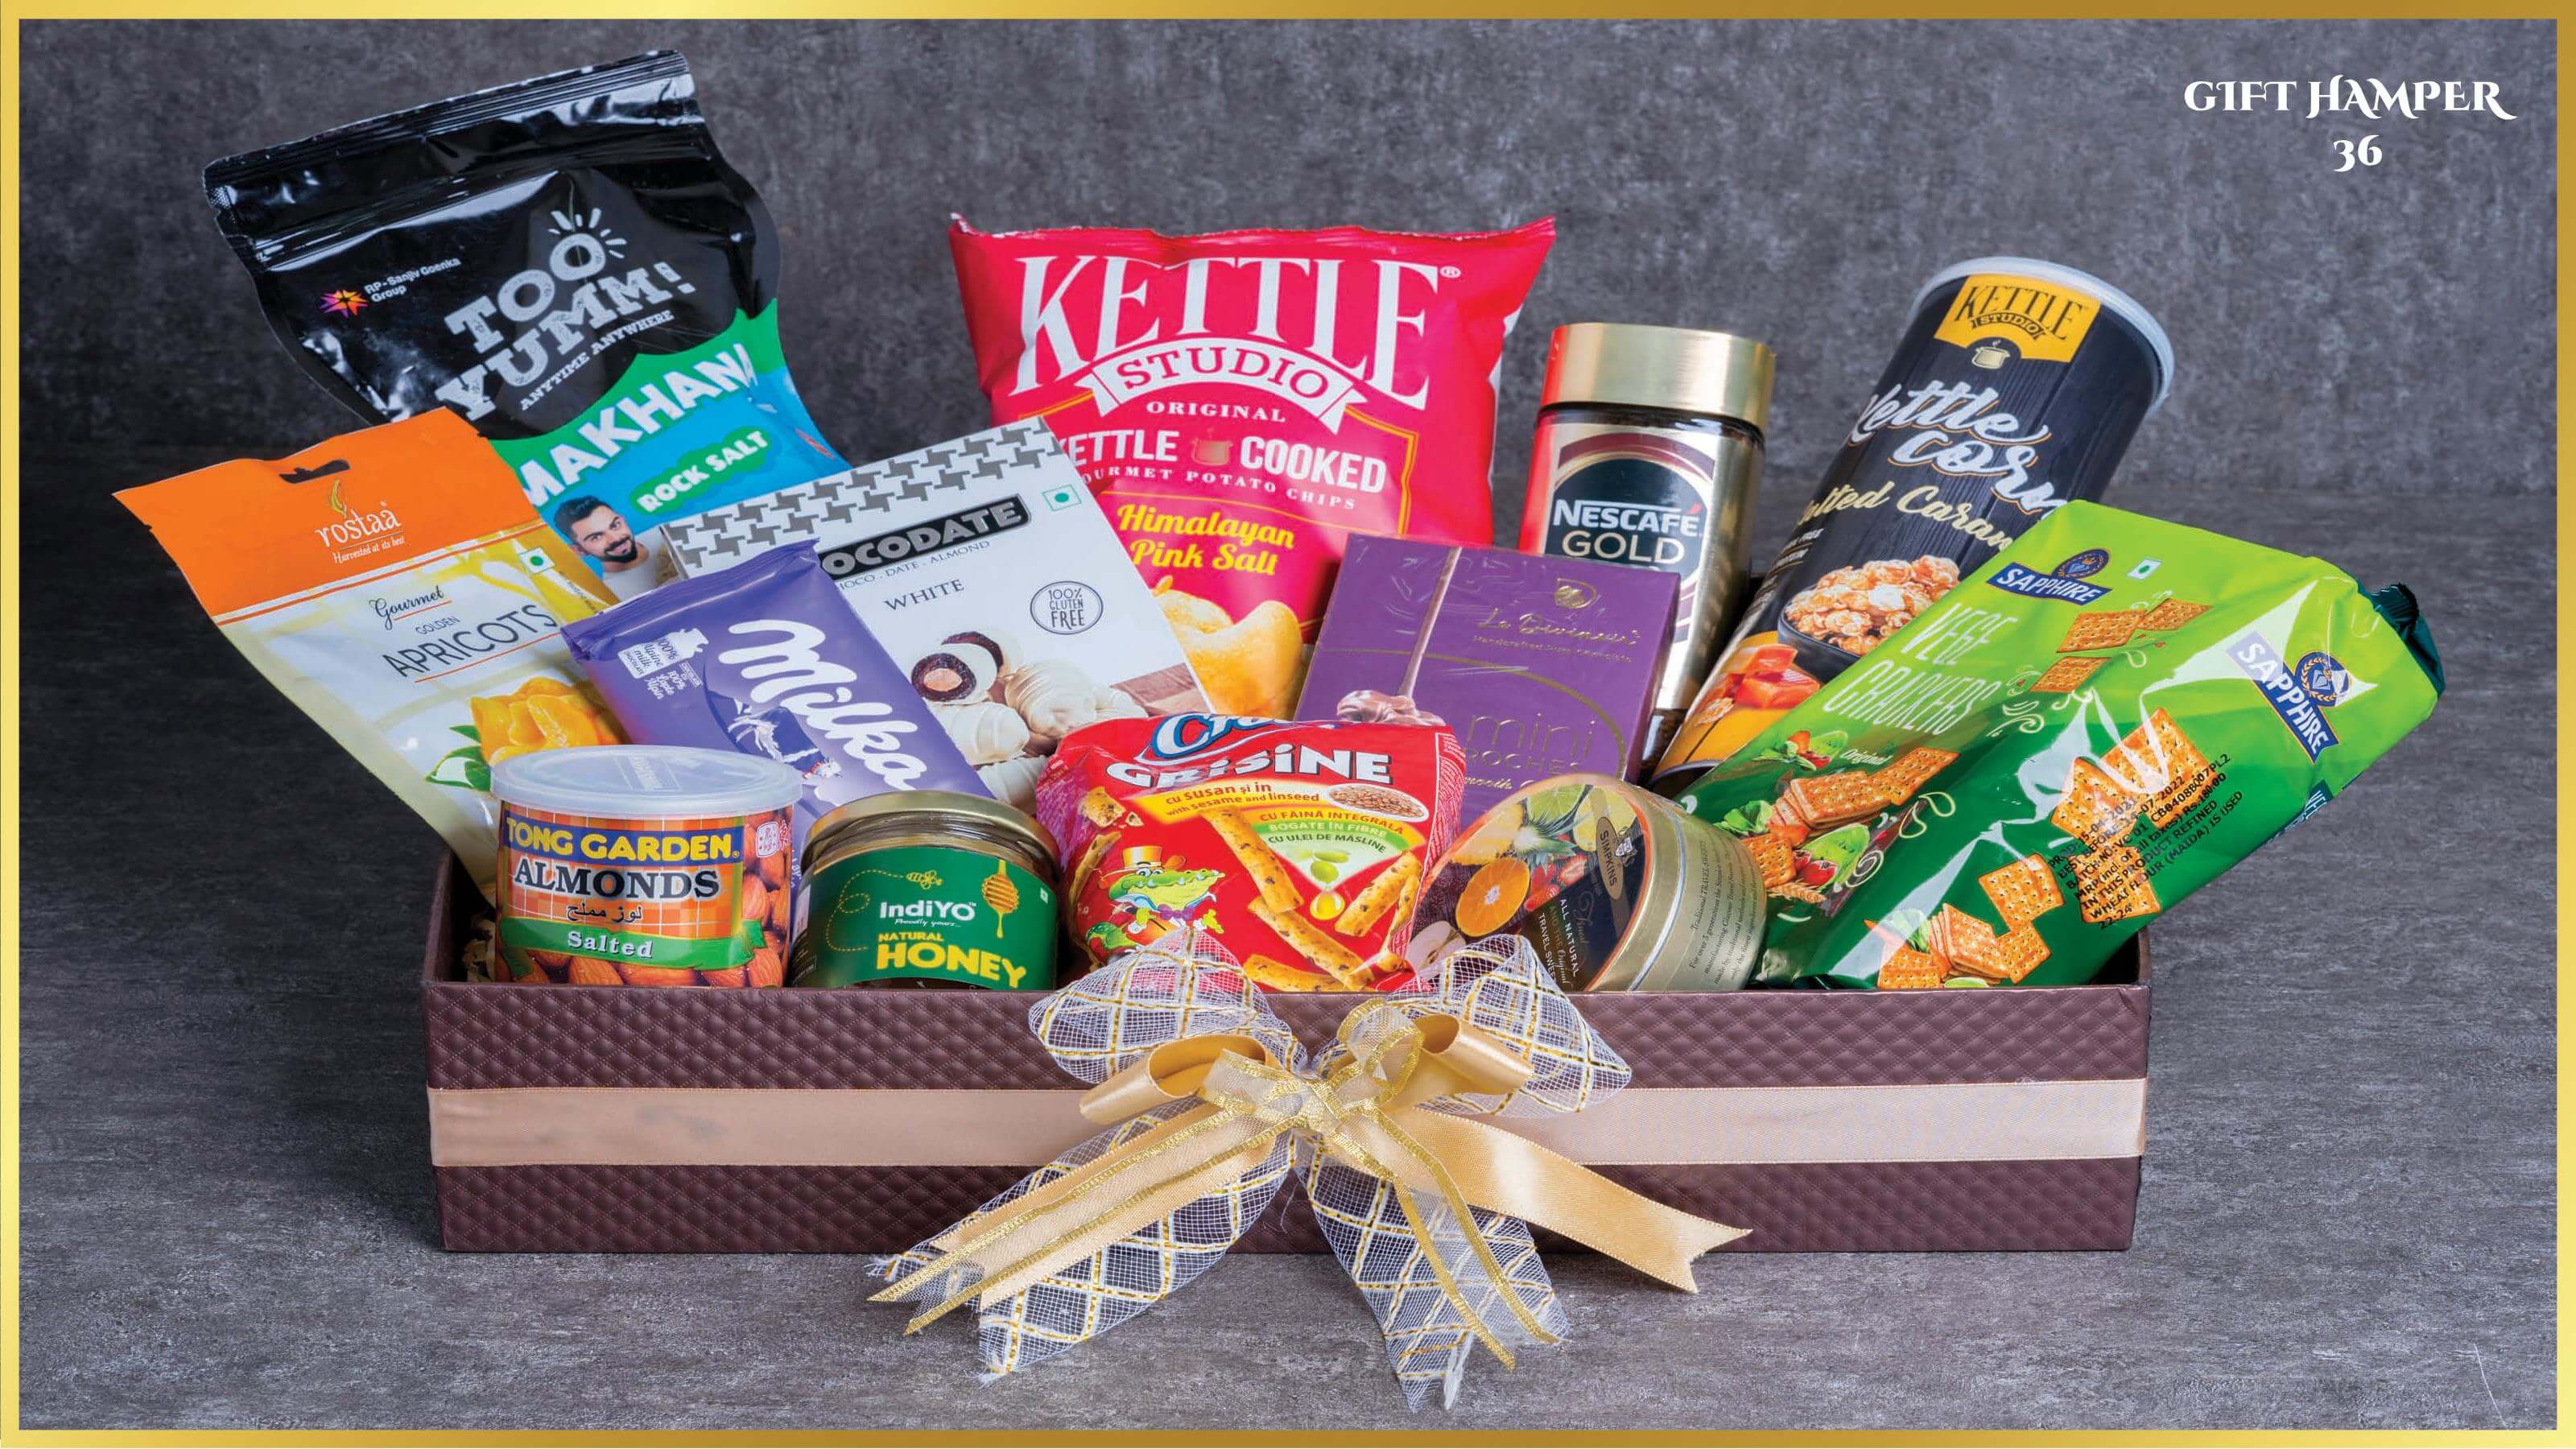 Gourmet Company  Gifts, Hamper, Gifts to Mumbai, Hamper in India